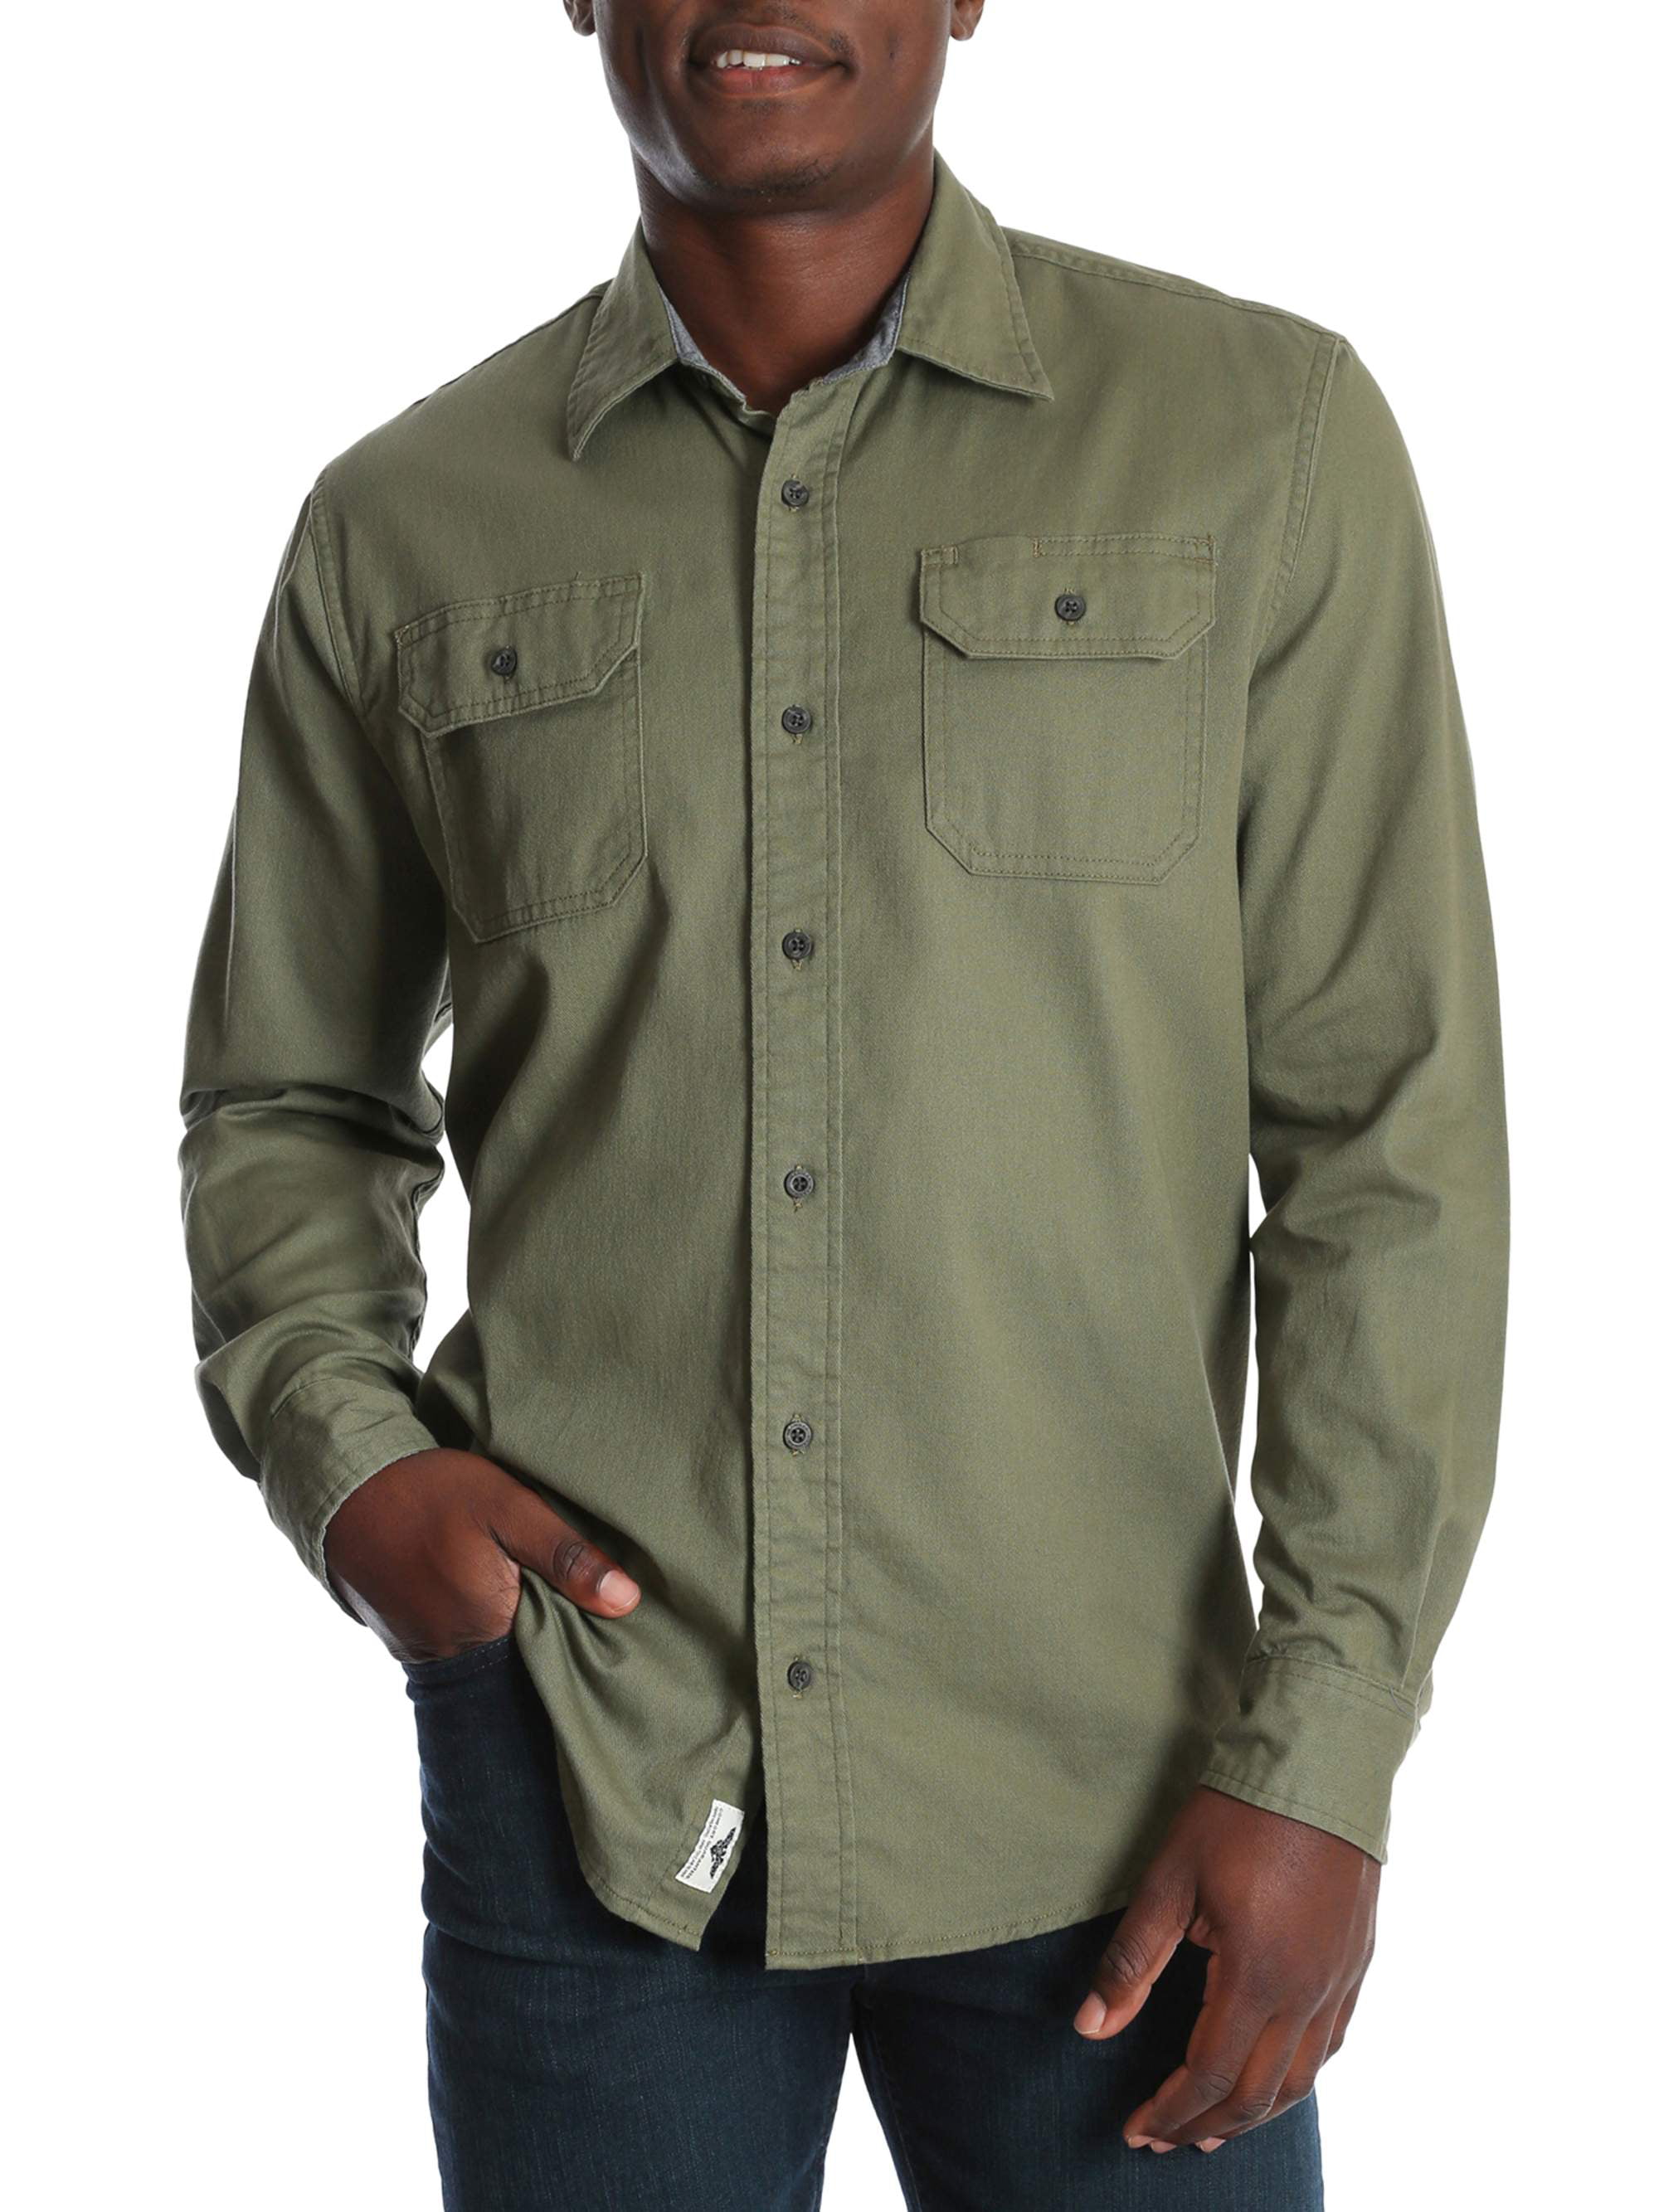 Wrangler Men's and Big & Tall Long Sleeve Stretch Twill Shirt, up to ...